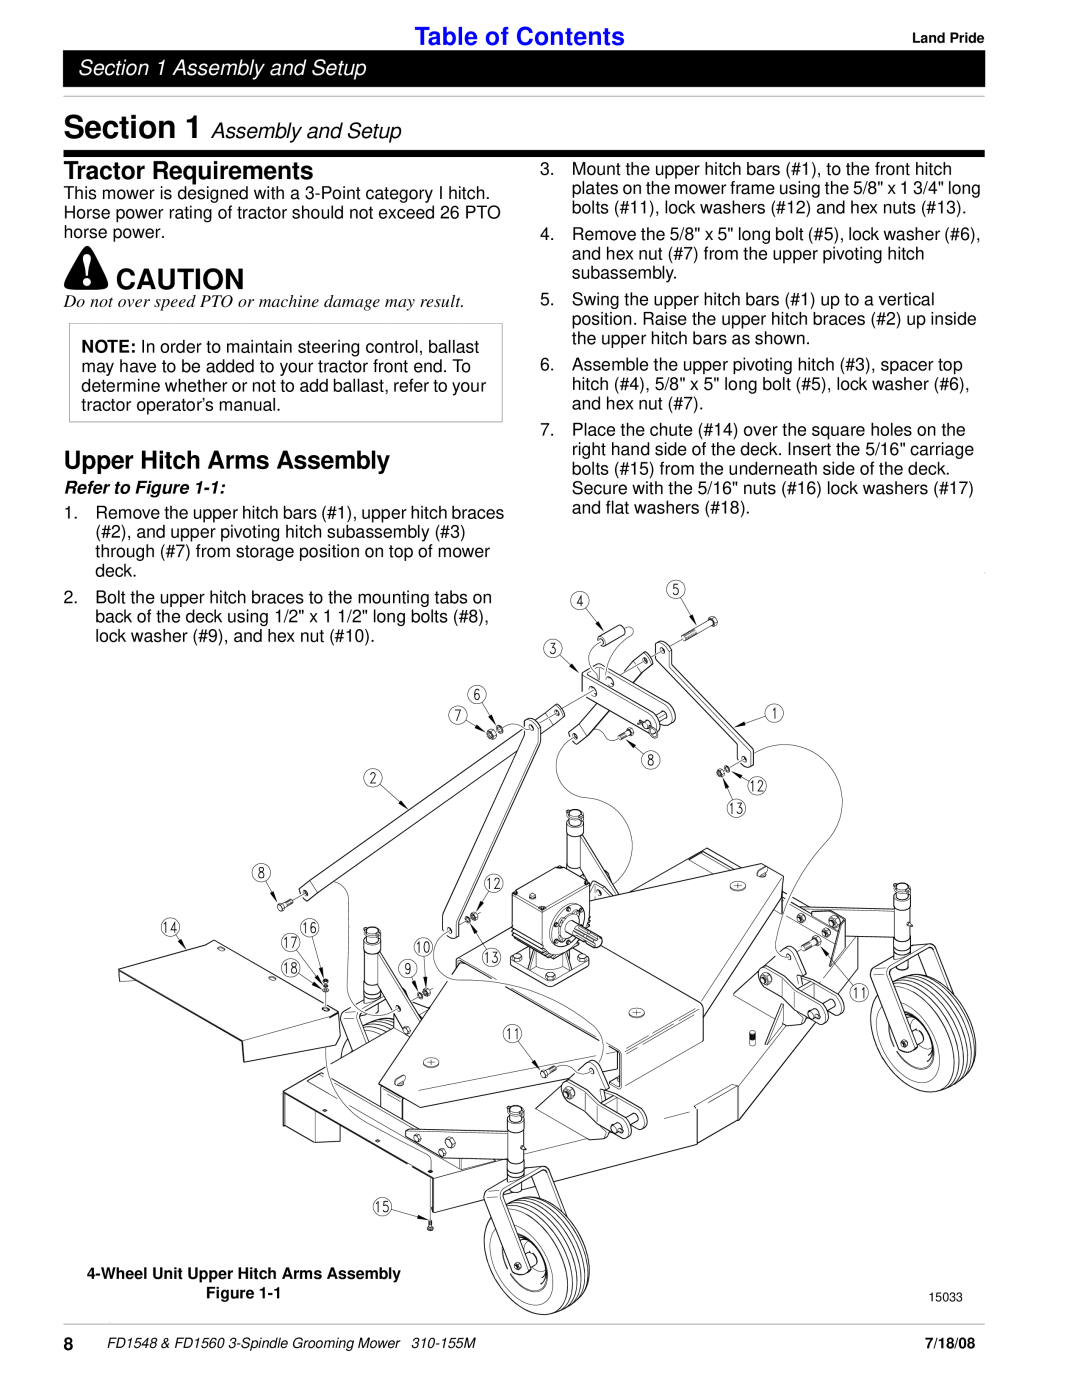 Land Pride fd1548 Tractor Requirements, Upper Hitch Arms Assembly, Assembly and Setup, Refer to Figure, Table of Contents 